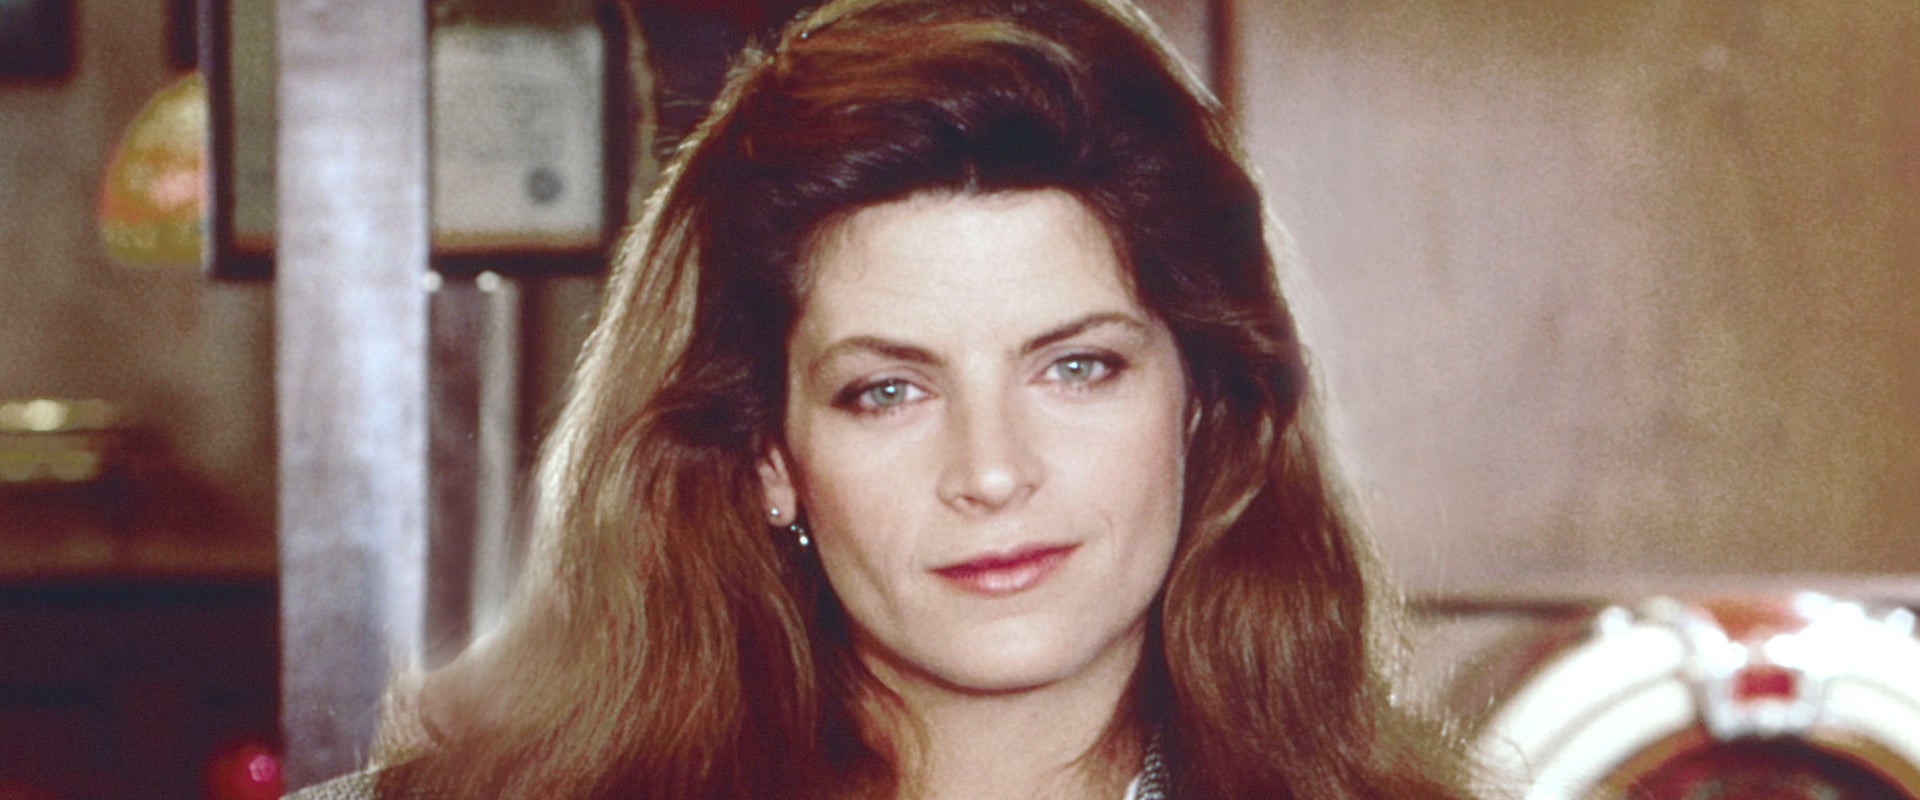 Kirstie Alley Throughout The Years